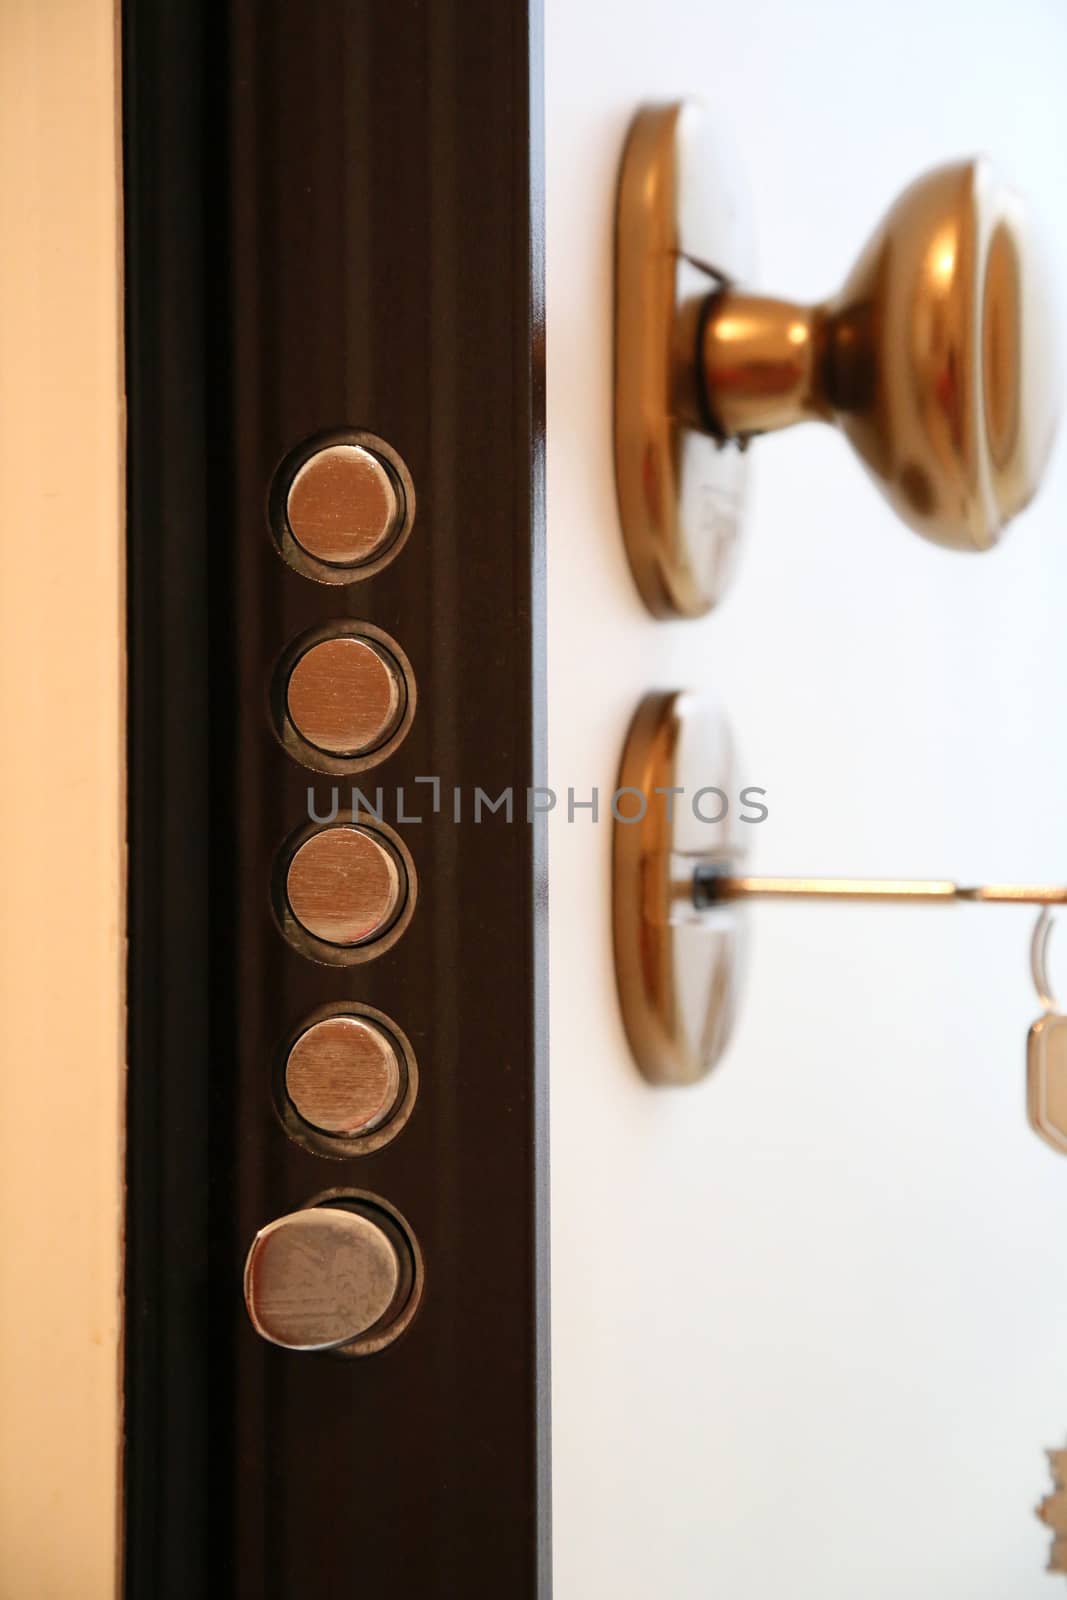 Security door latches with doorknob, lock and keys in the background